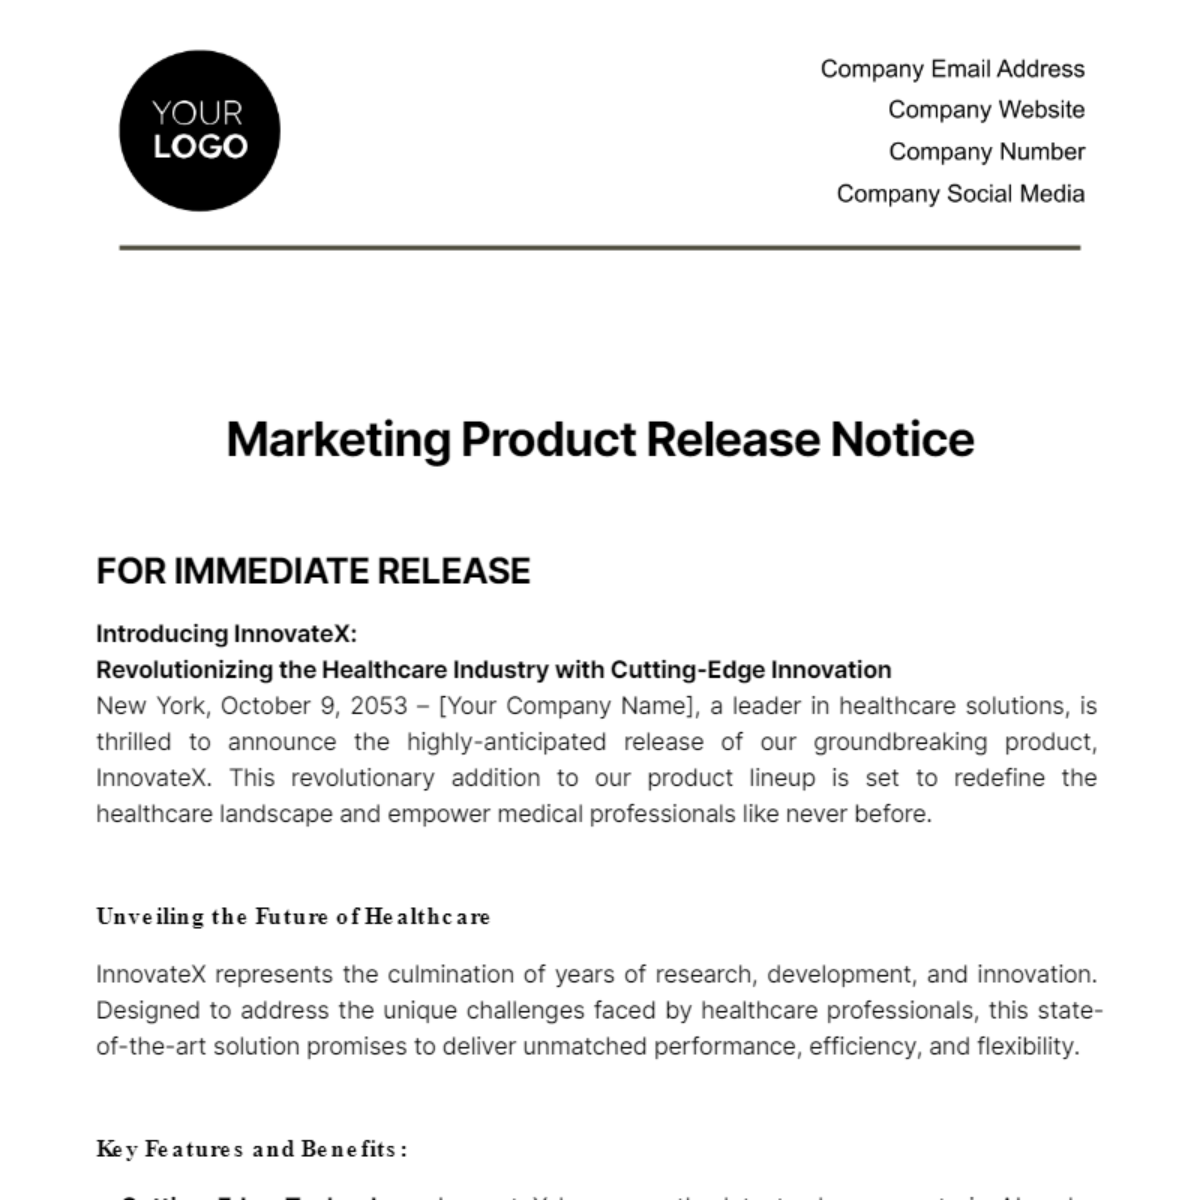 Marketing Product Release Notice Template